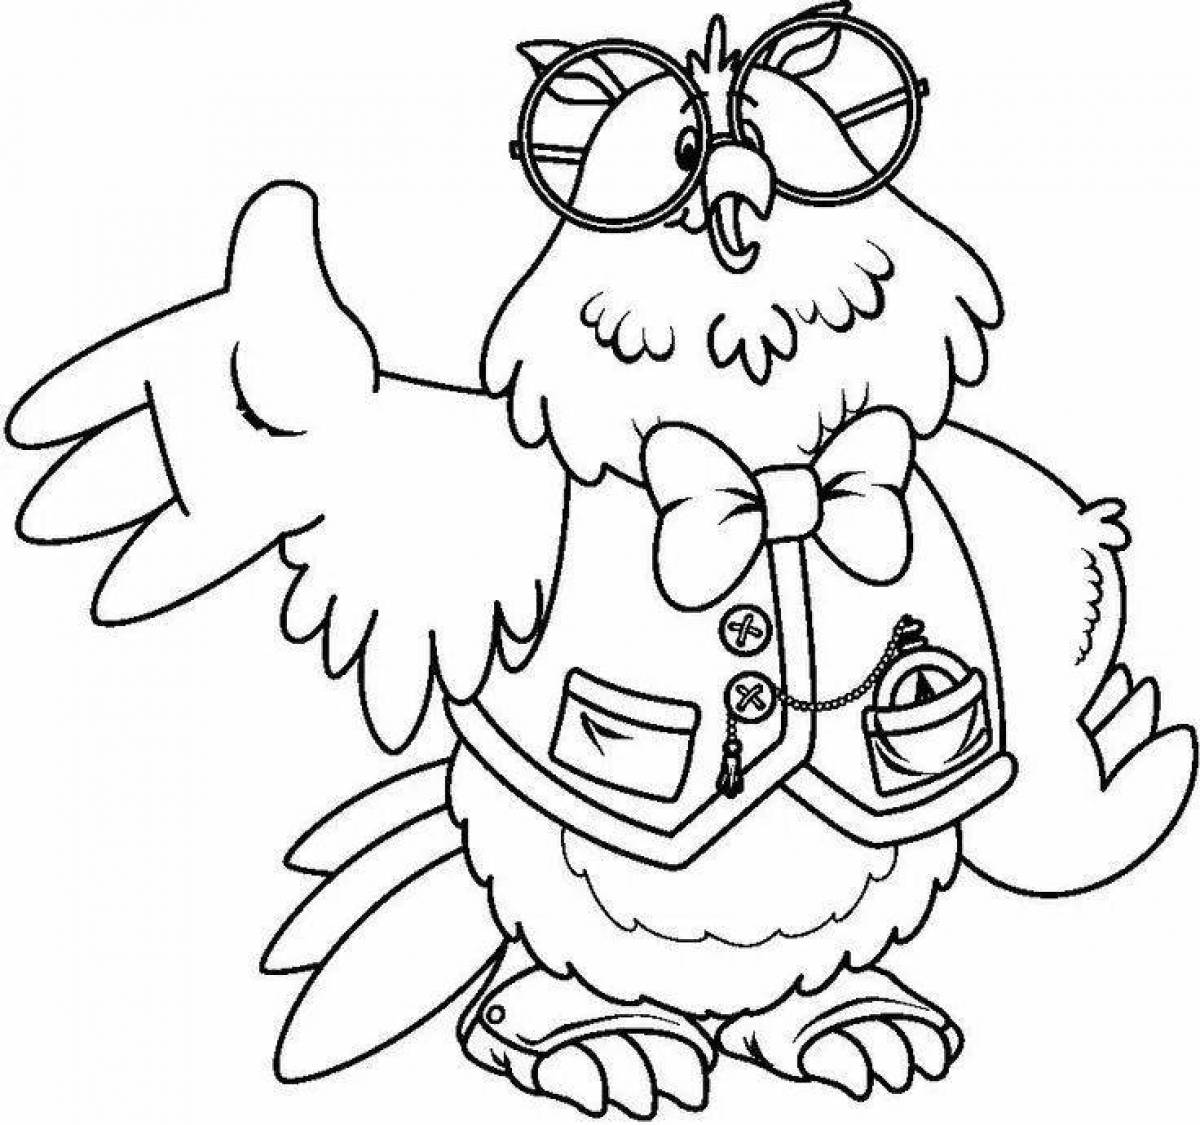 Colorful smart owl coloring page